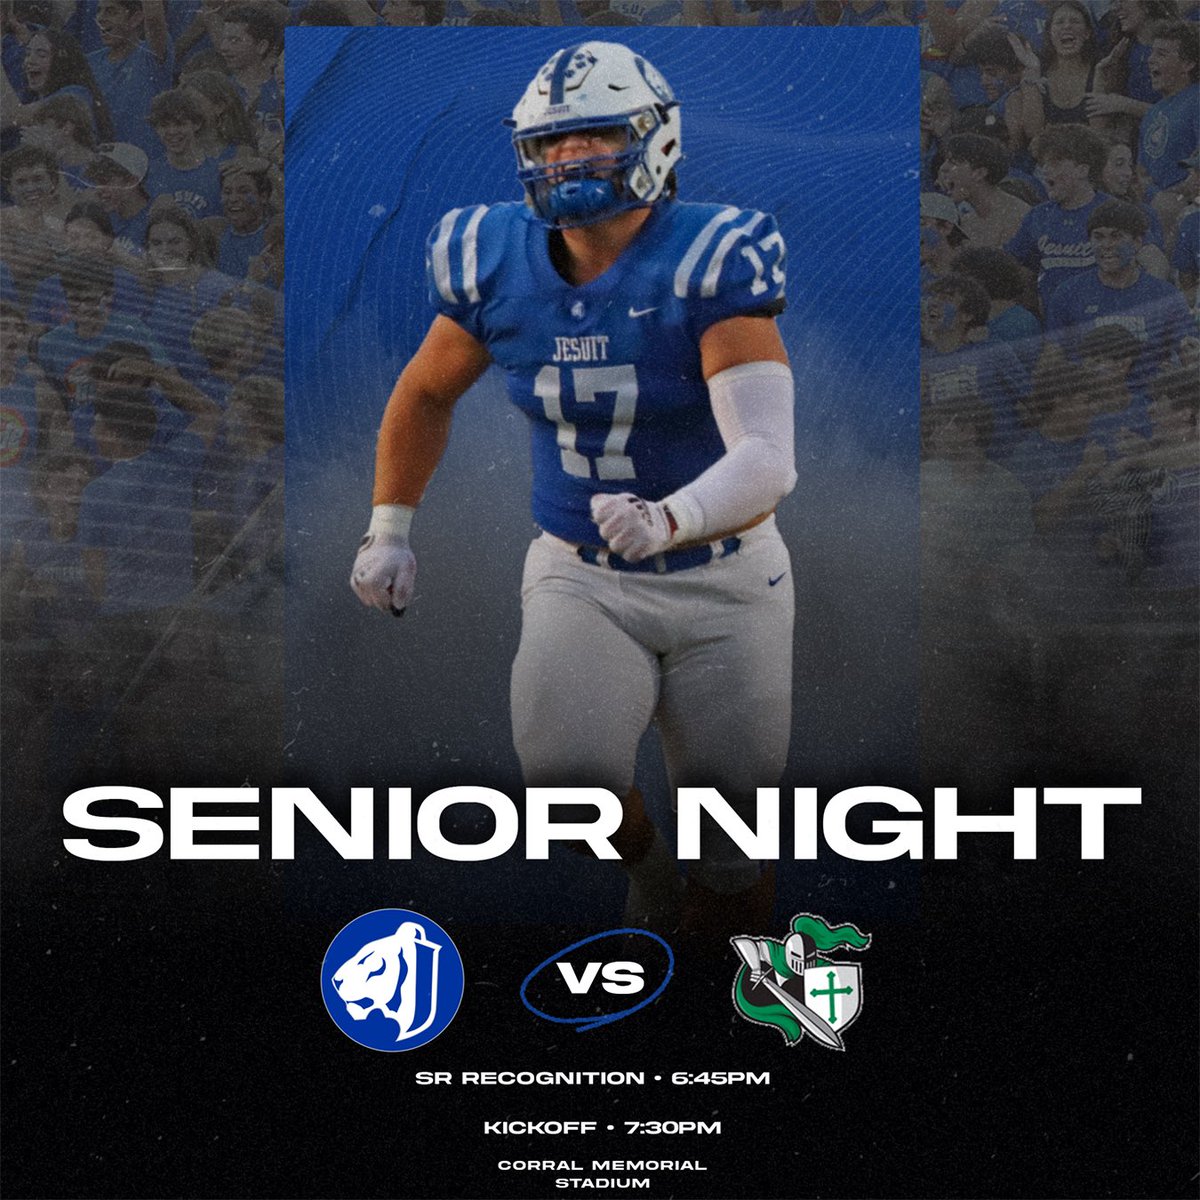 Before the big football game tonight, come out and celebrate the seniors.

The pregame ceremony at Corral Memorial Stadium begins at 6:45pm, kickoff is at 7:30.

#AMDG #GoTigers #JesuitFootball